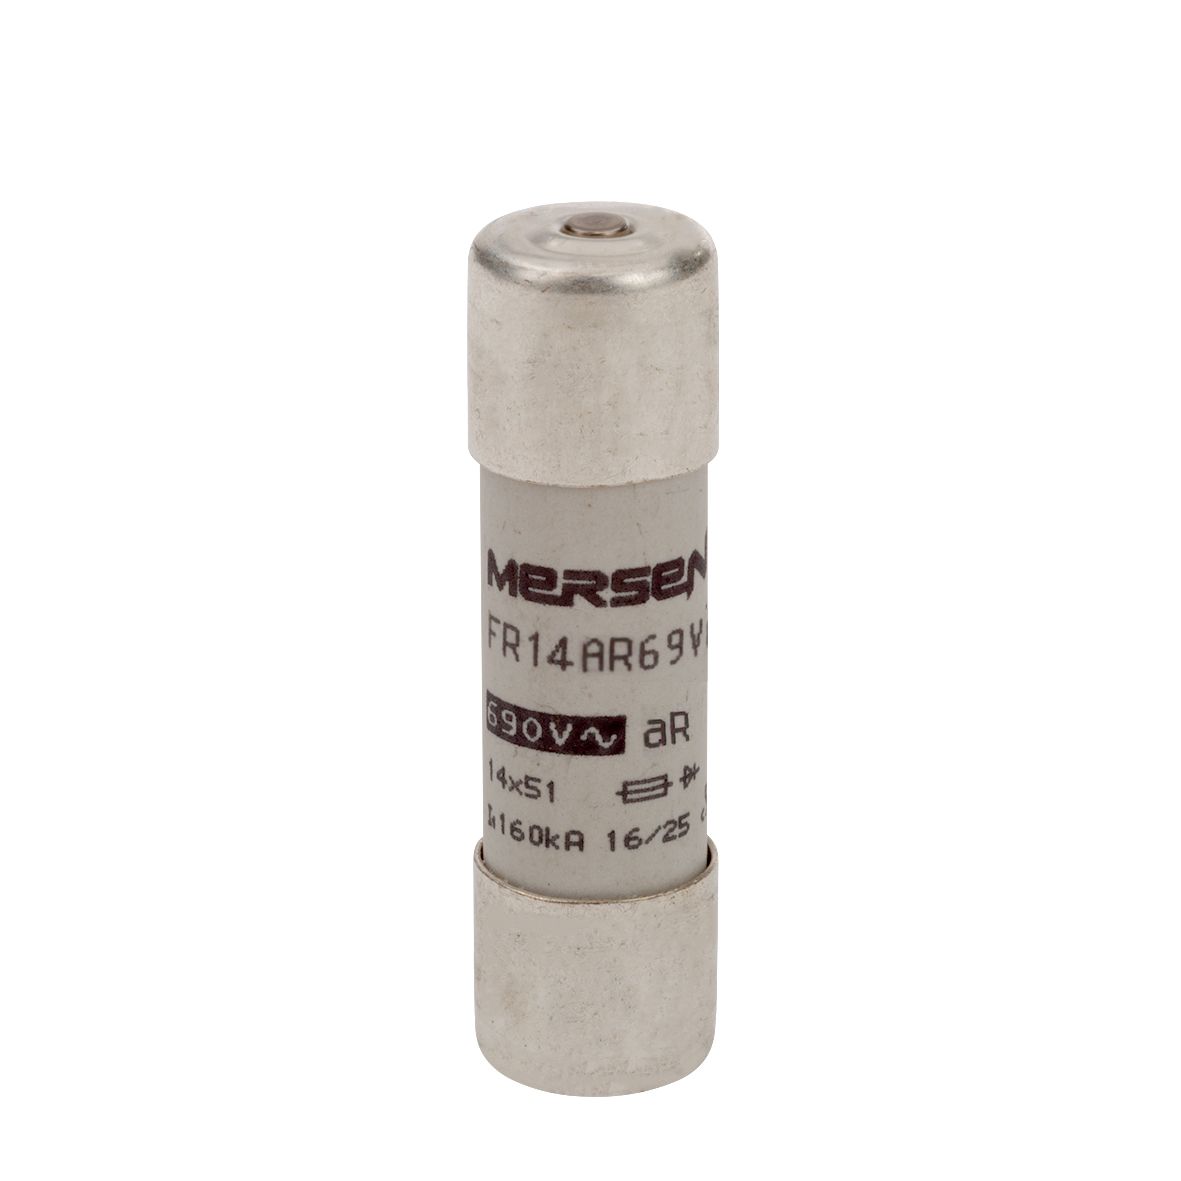 S1056659 - Cylindrical fuse-link aR 690VAC 14x51, 12A, with indicator